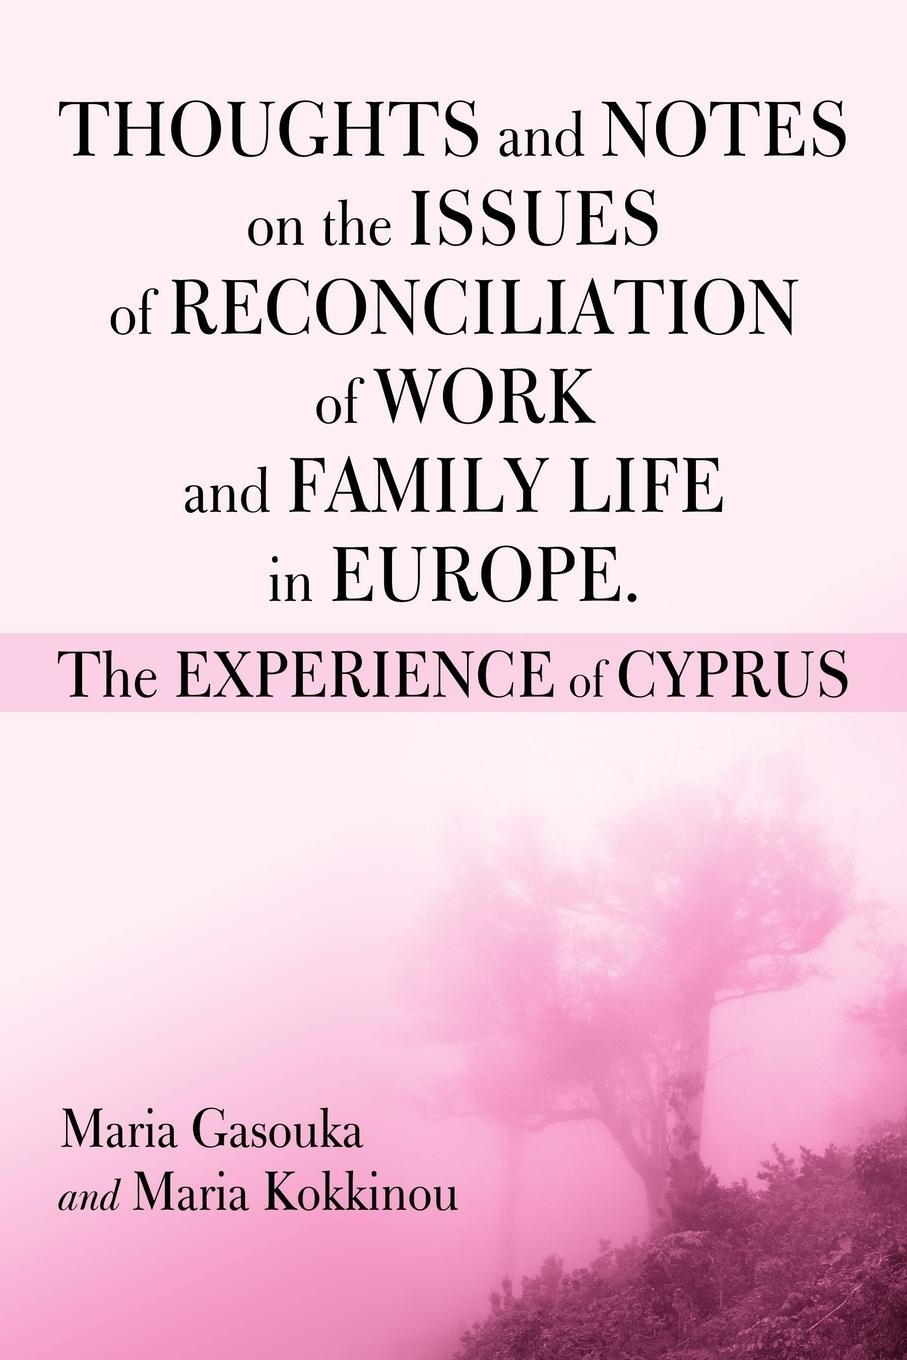 THOUGHTS AND NOTES ON THE ISSUES OF RECONCILIATION OF WORK AND FAMILY LIFE IN EUROPE. THE EXPERIENCE OF CYPRUS - Gasoukan, Maria|Kokkinou, Maria